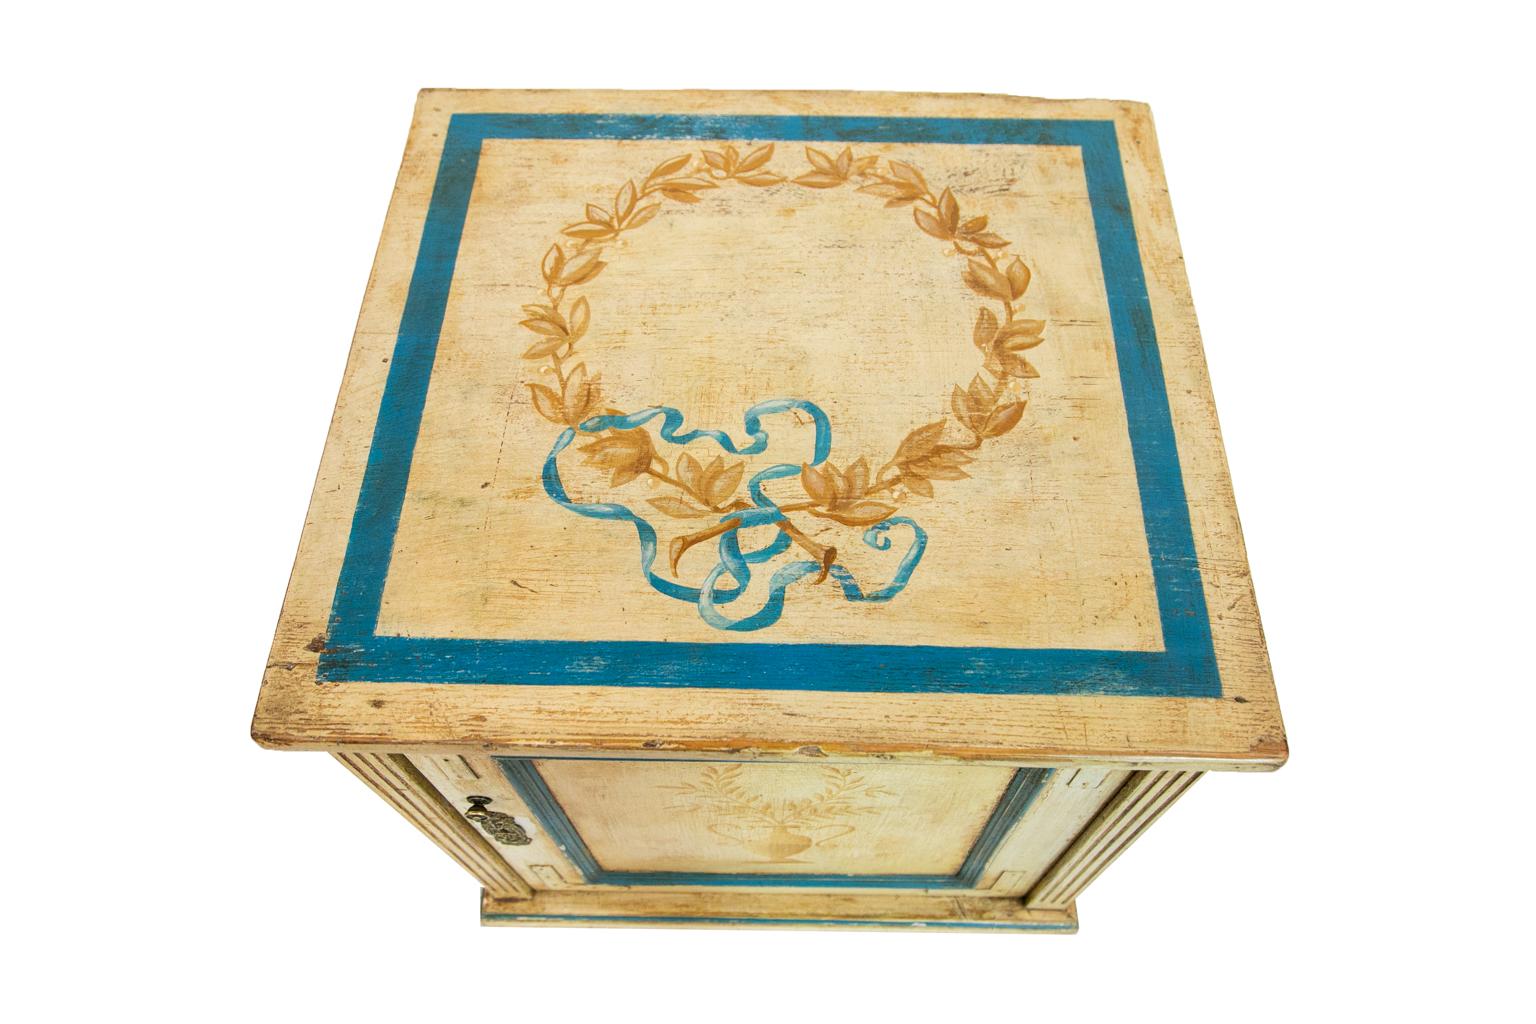 The top of this French cupboard is hand painted with a floral wreath tied with blue ribbon and framed with a blue painted square. The door is painted with a classical urn holding ferns. The door frame is reinforced with applied metal corners. The